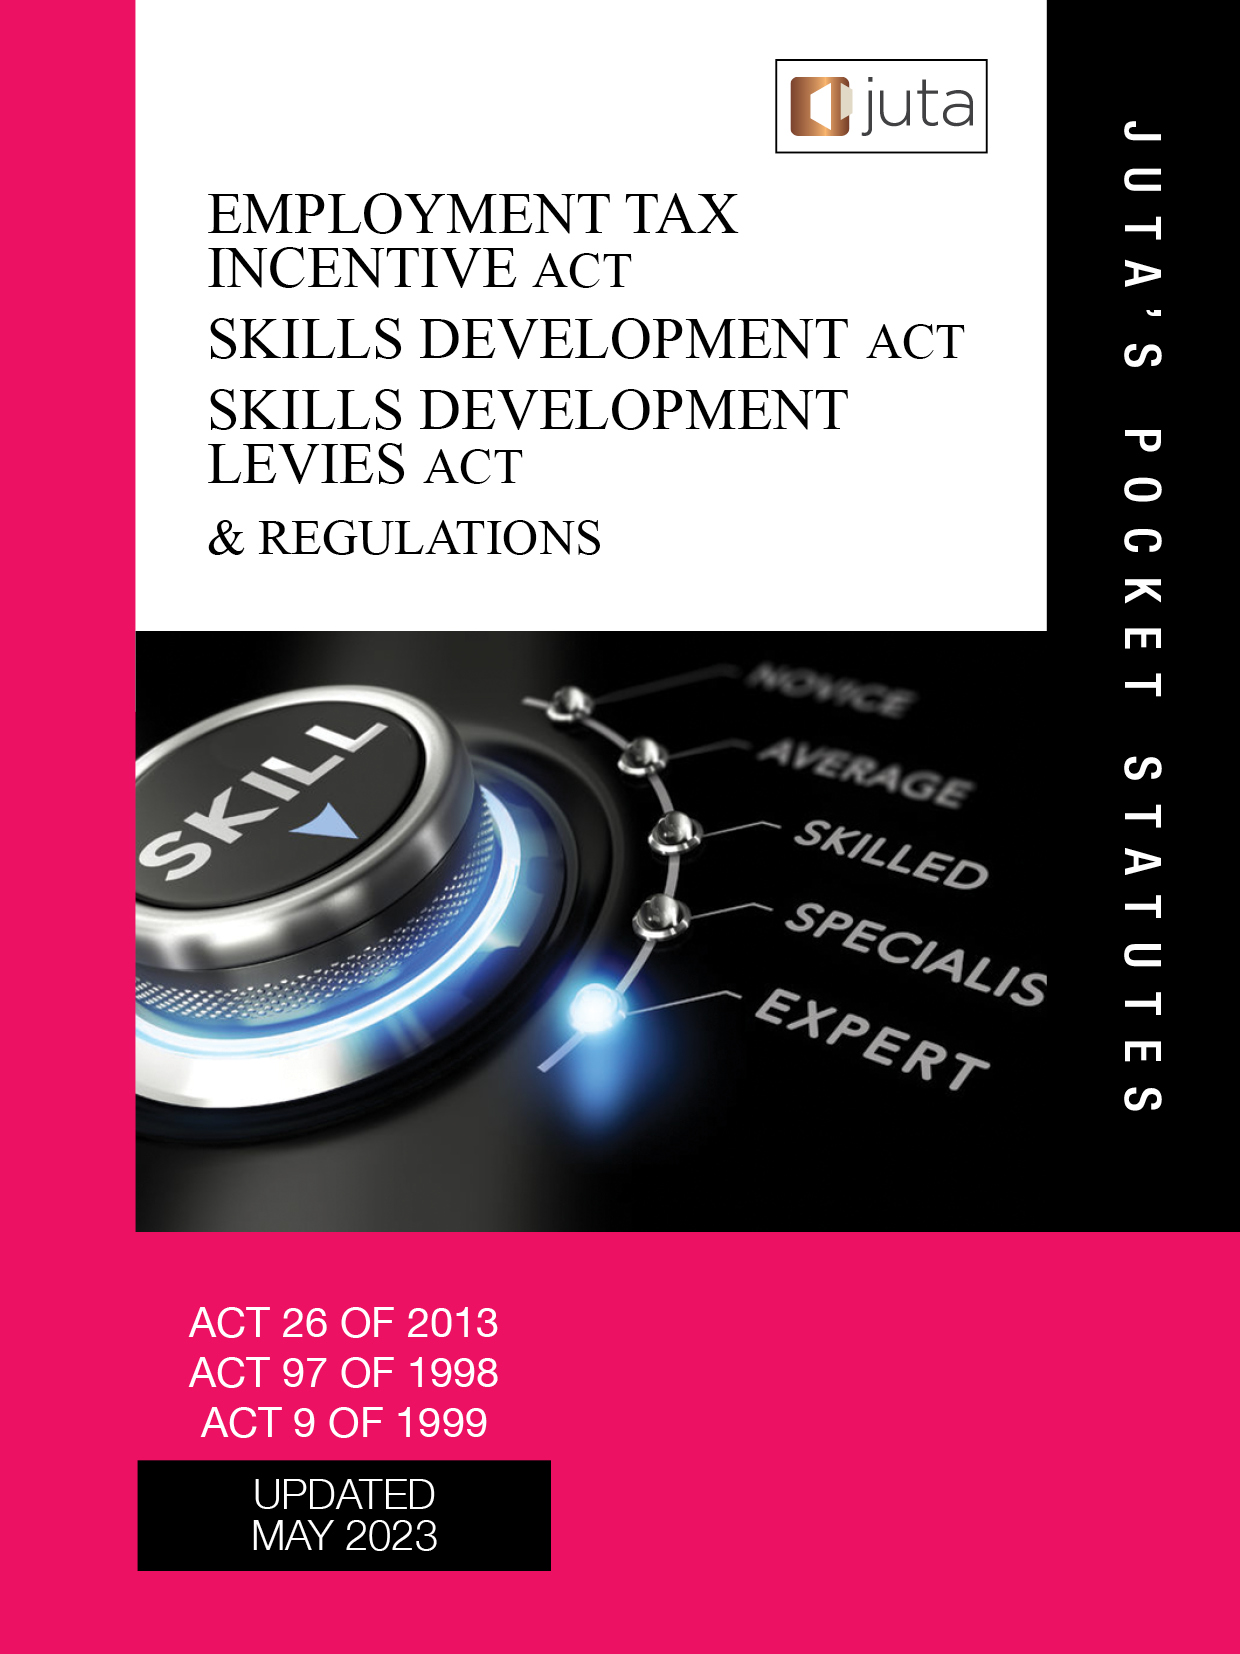 Employment Tax Incentive Act 26 of 2013; Skills Development Act 97 of 1998; Skills Development Levies Act 9 of 1999 & Regulations